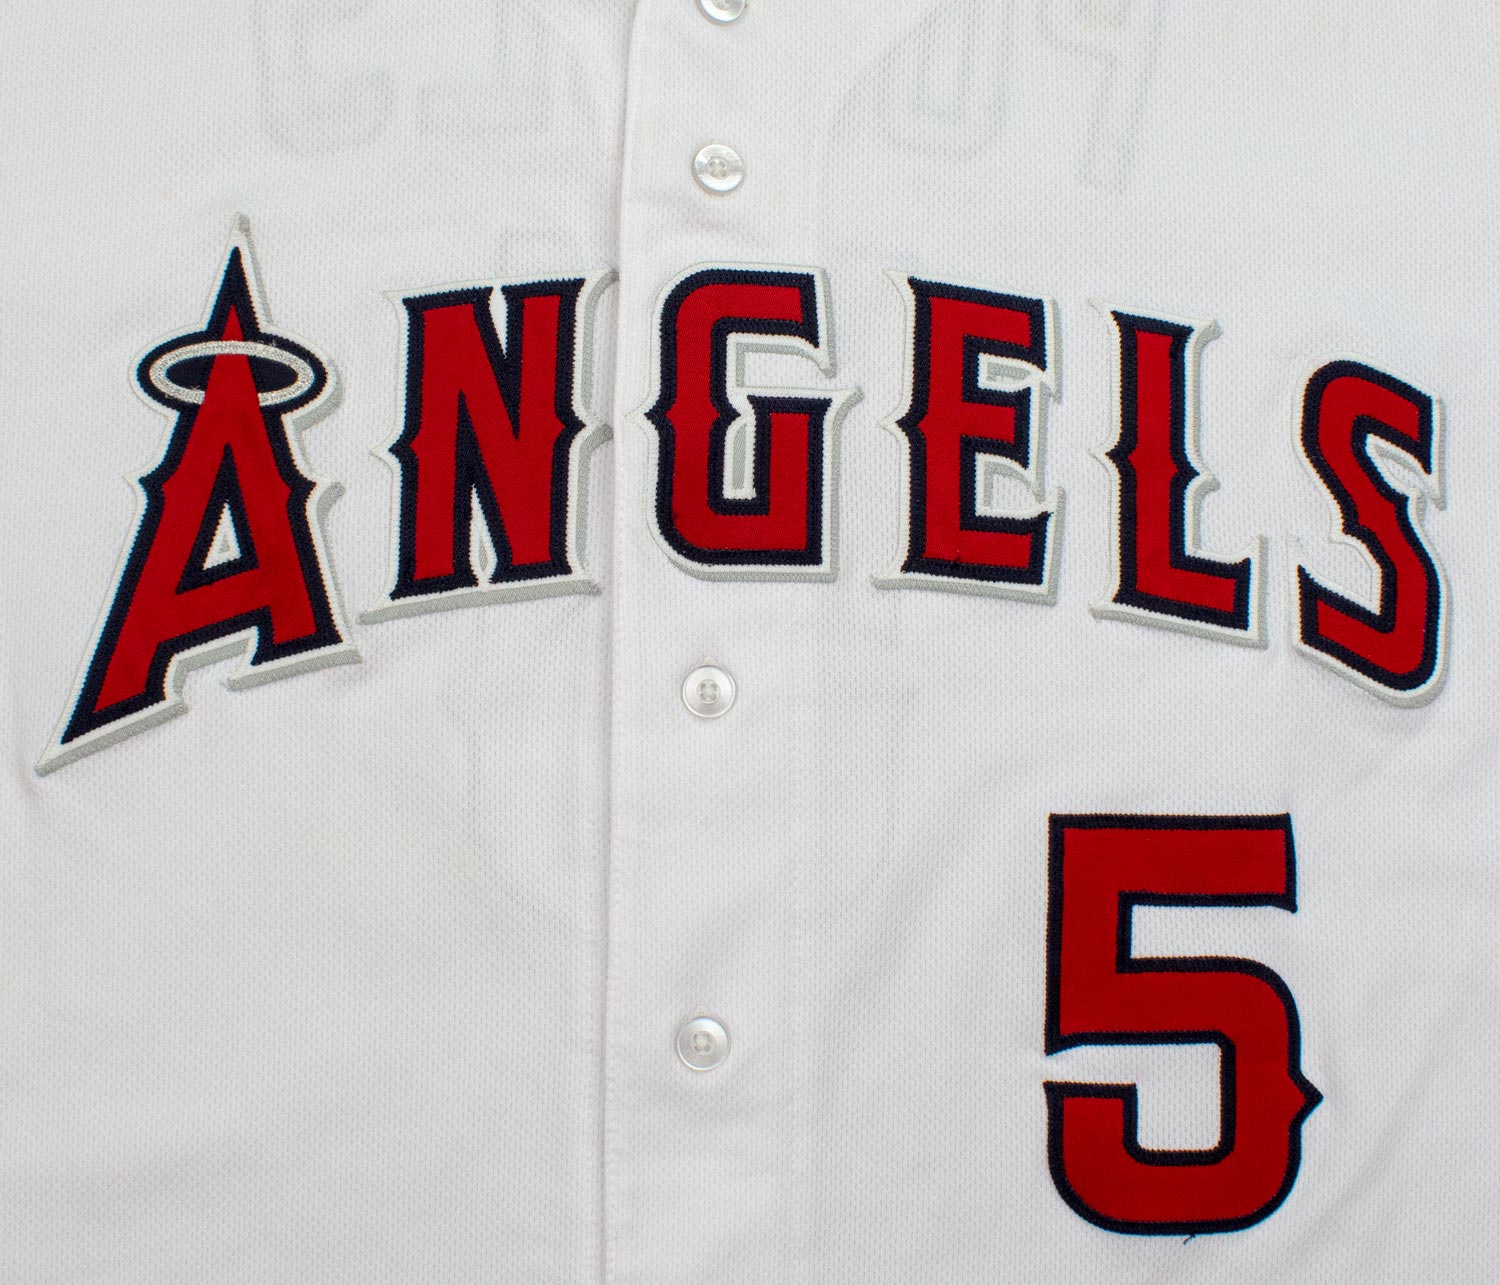 Lot Detail - 2019 Albert Pujols Game Used Los Angeles Angels Road Jersey  Photo Matched To 15 Games For 6 Home Runs (MLB Authenticated & Sports  Investors)